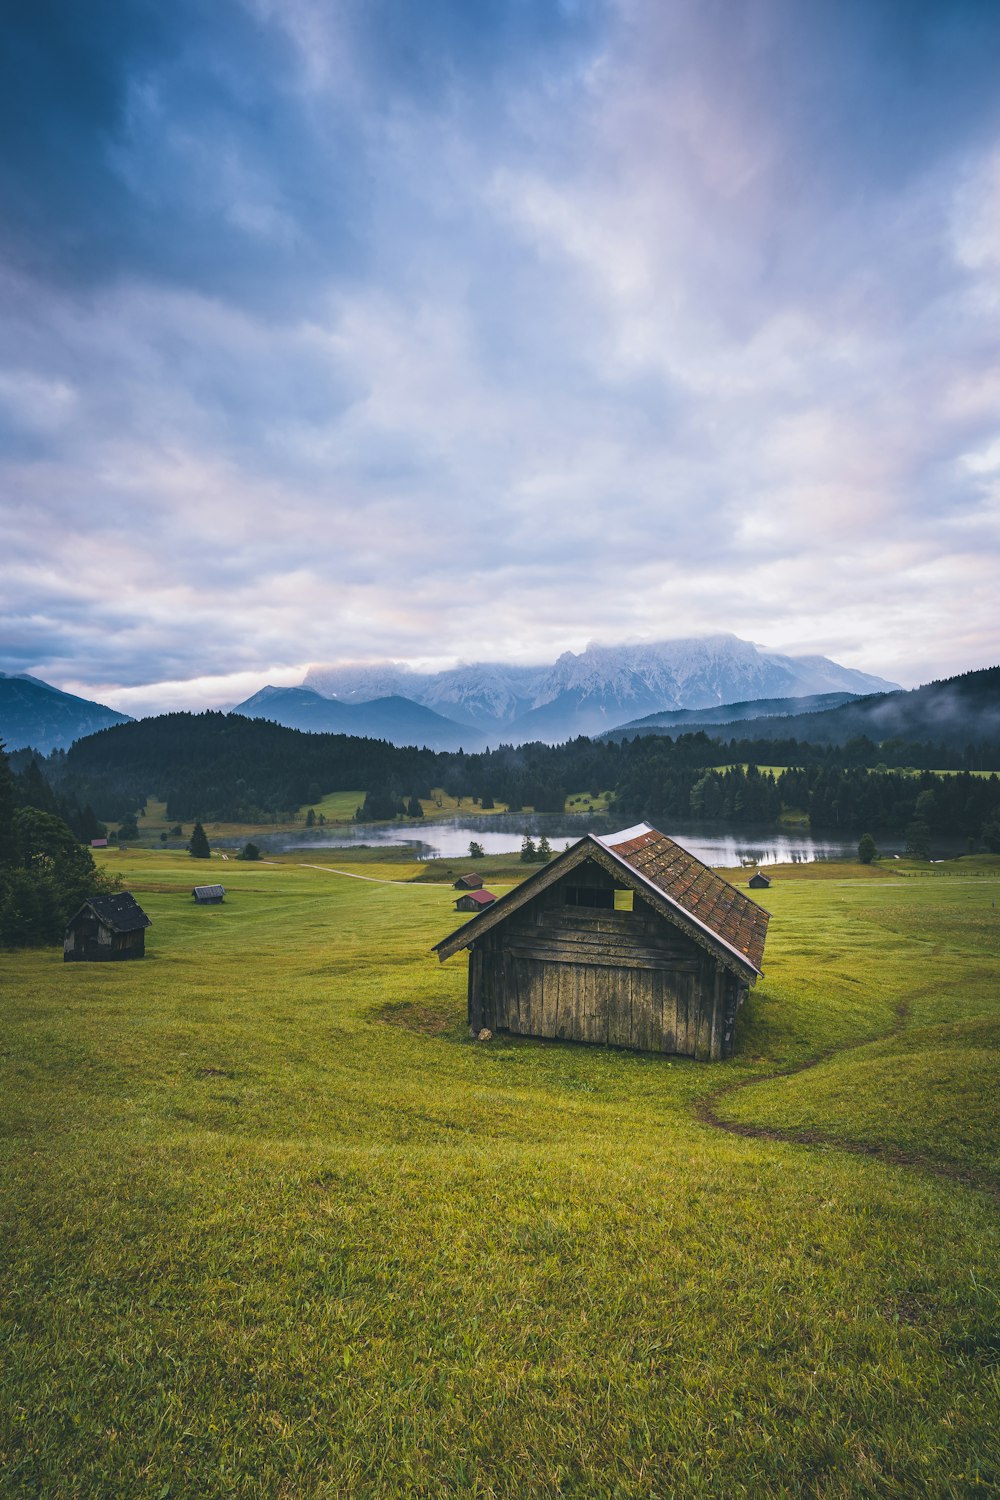 brown wooden house on green grass field near green mountains under white clouds and blue sky